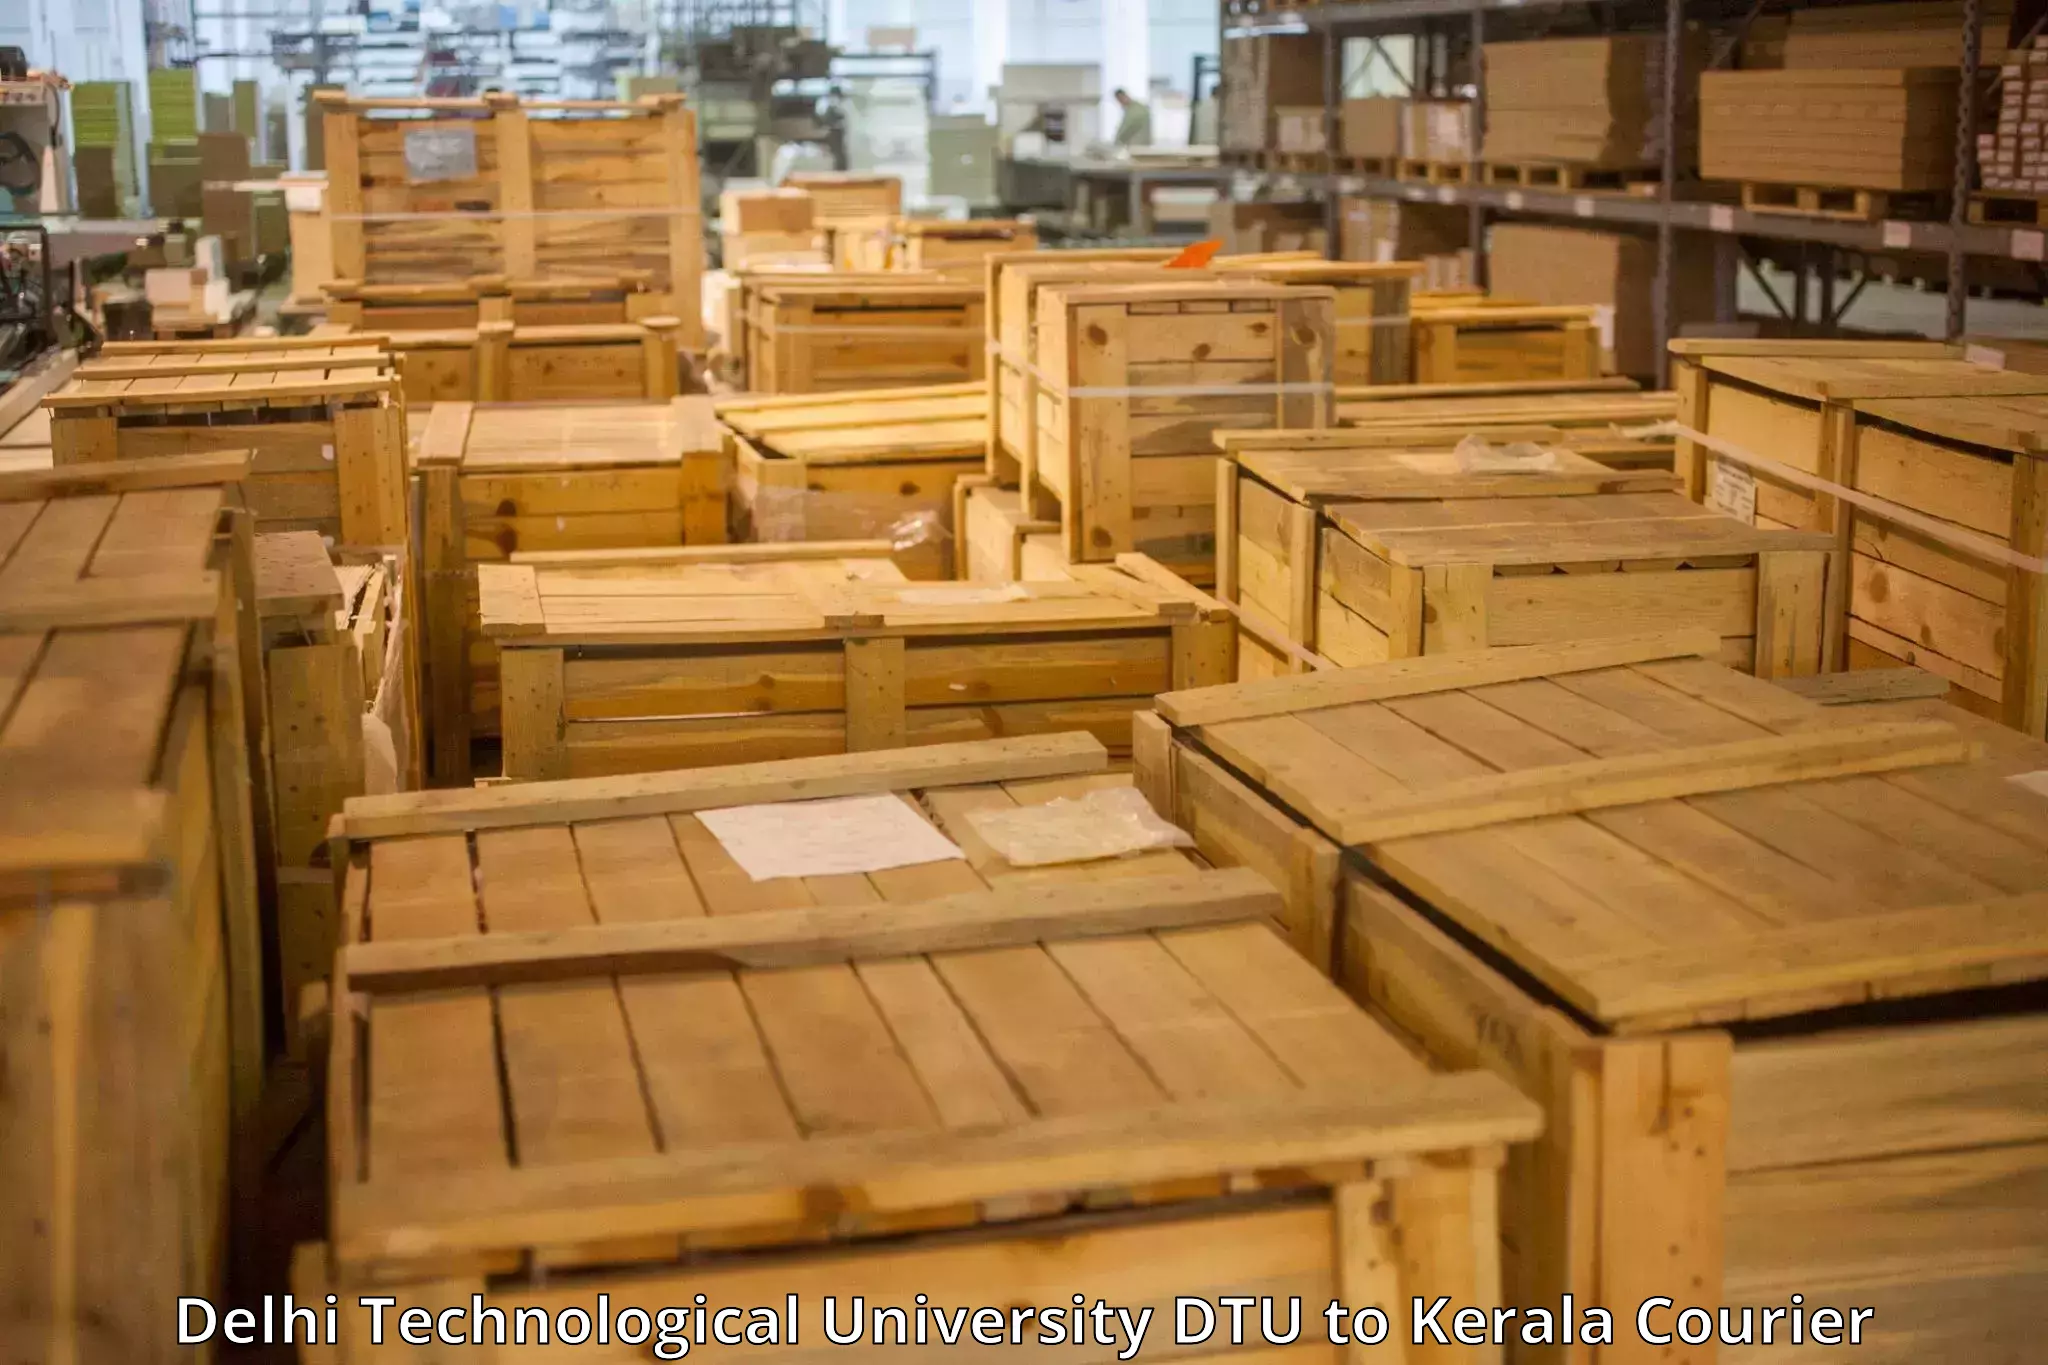 Luggage storage and delivery Delhi Technological University DTU to Kerala